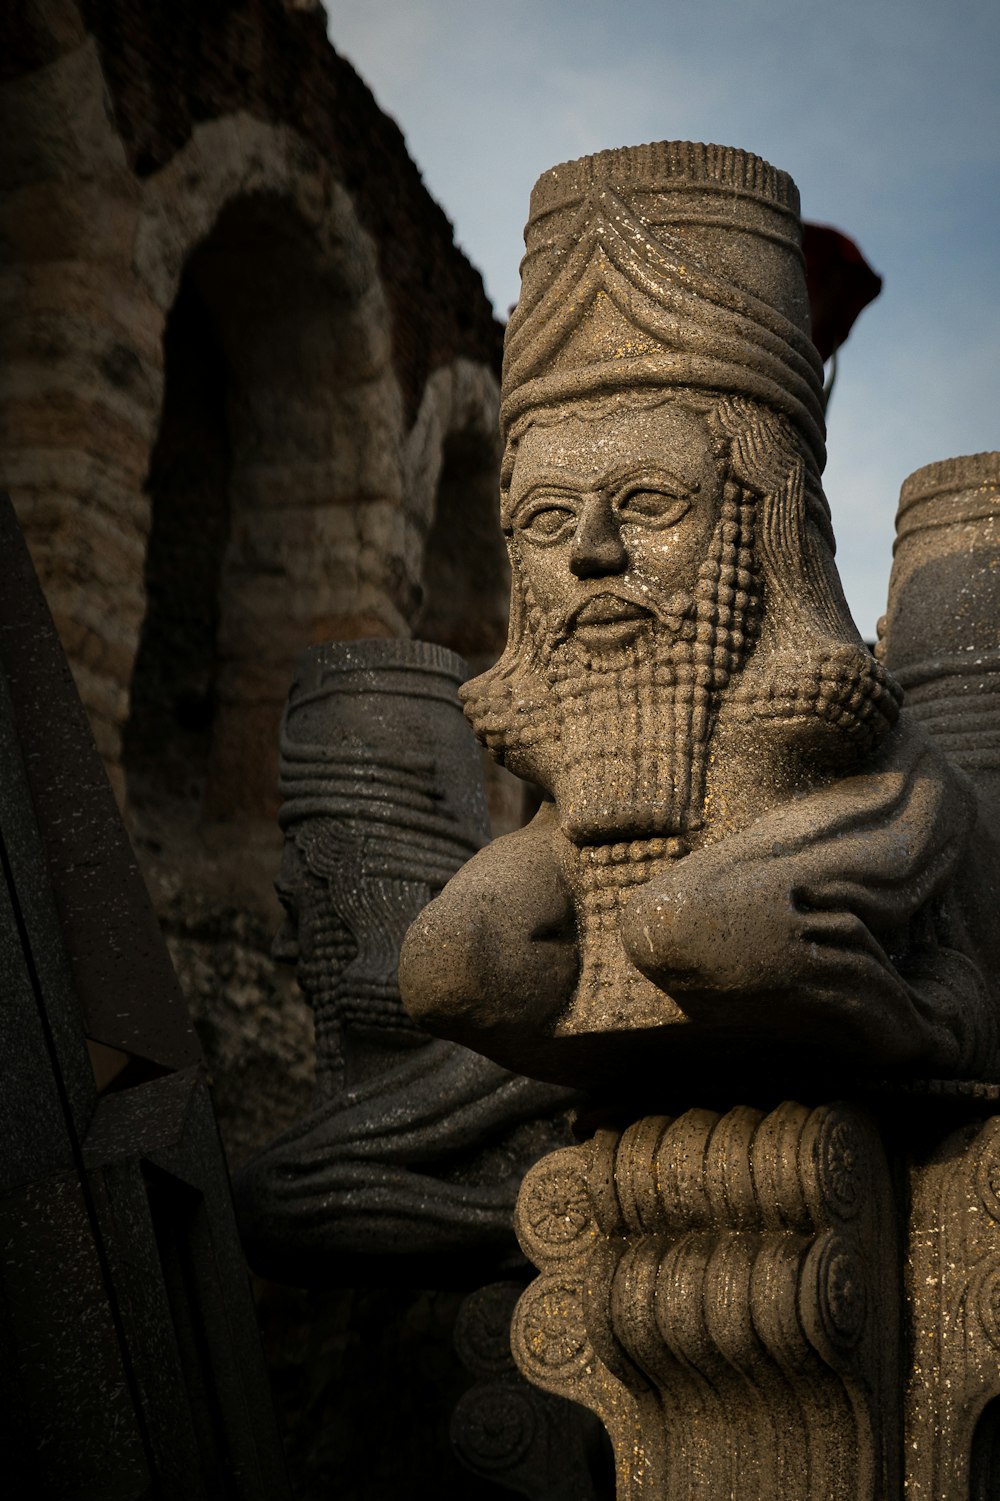 a statue of an old man with a beard